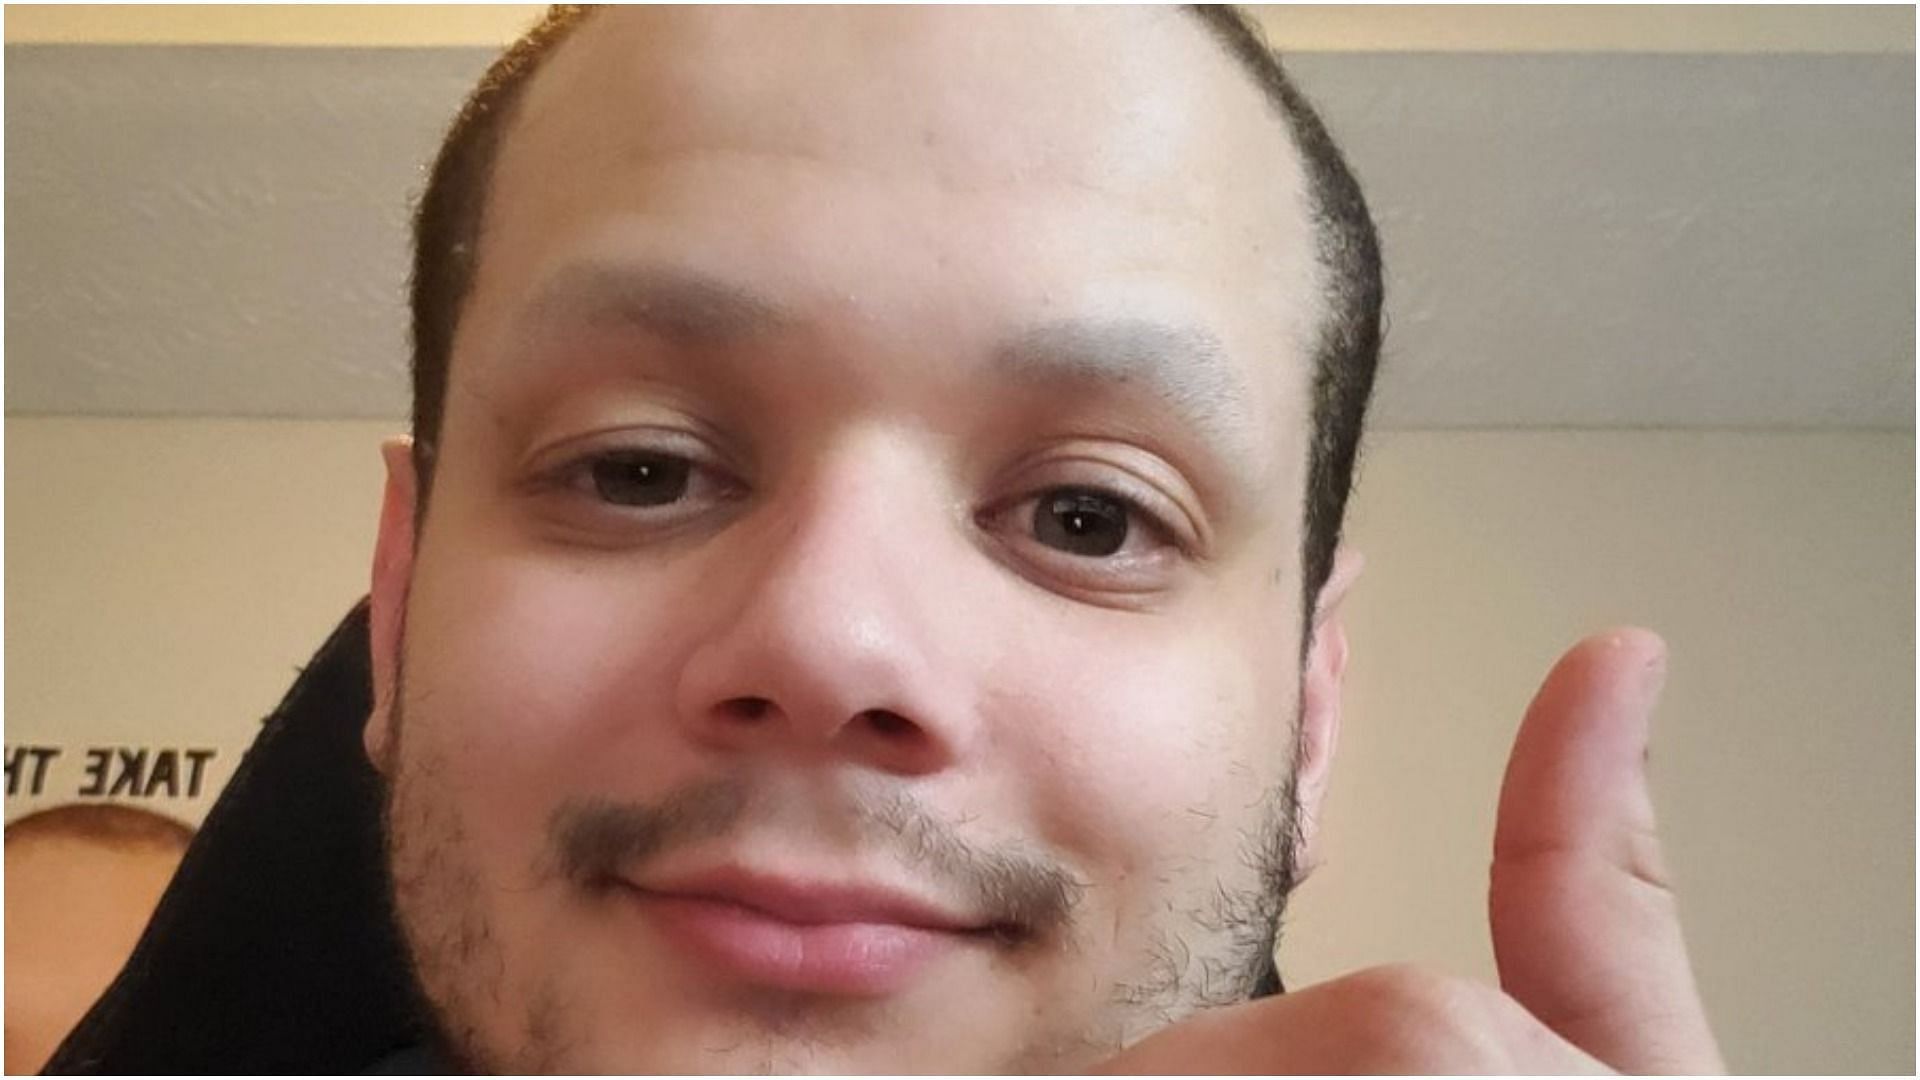 Erobb&#039;s fans troll him by making him the top Google result for ugliest man in Texas (Image via Erobb/Twitter)